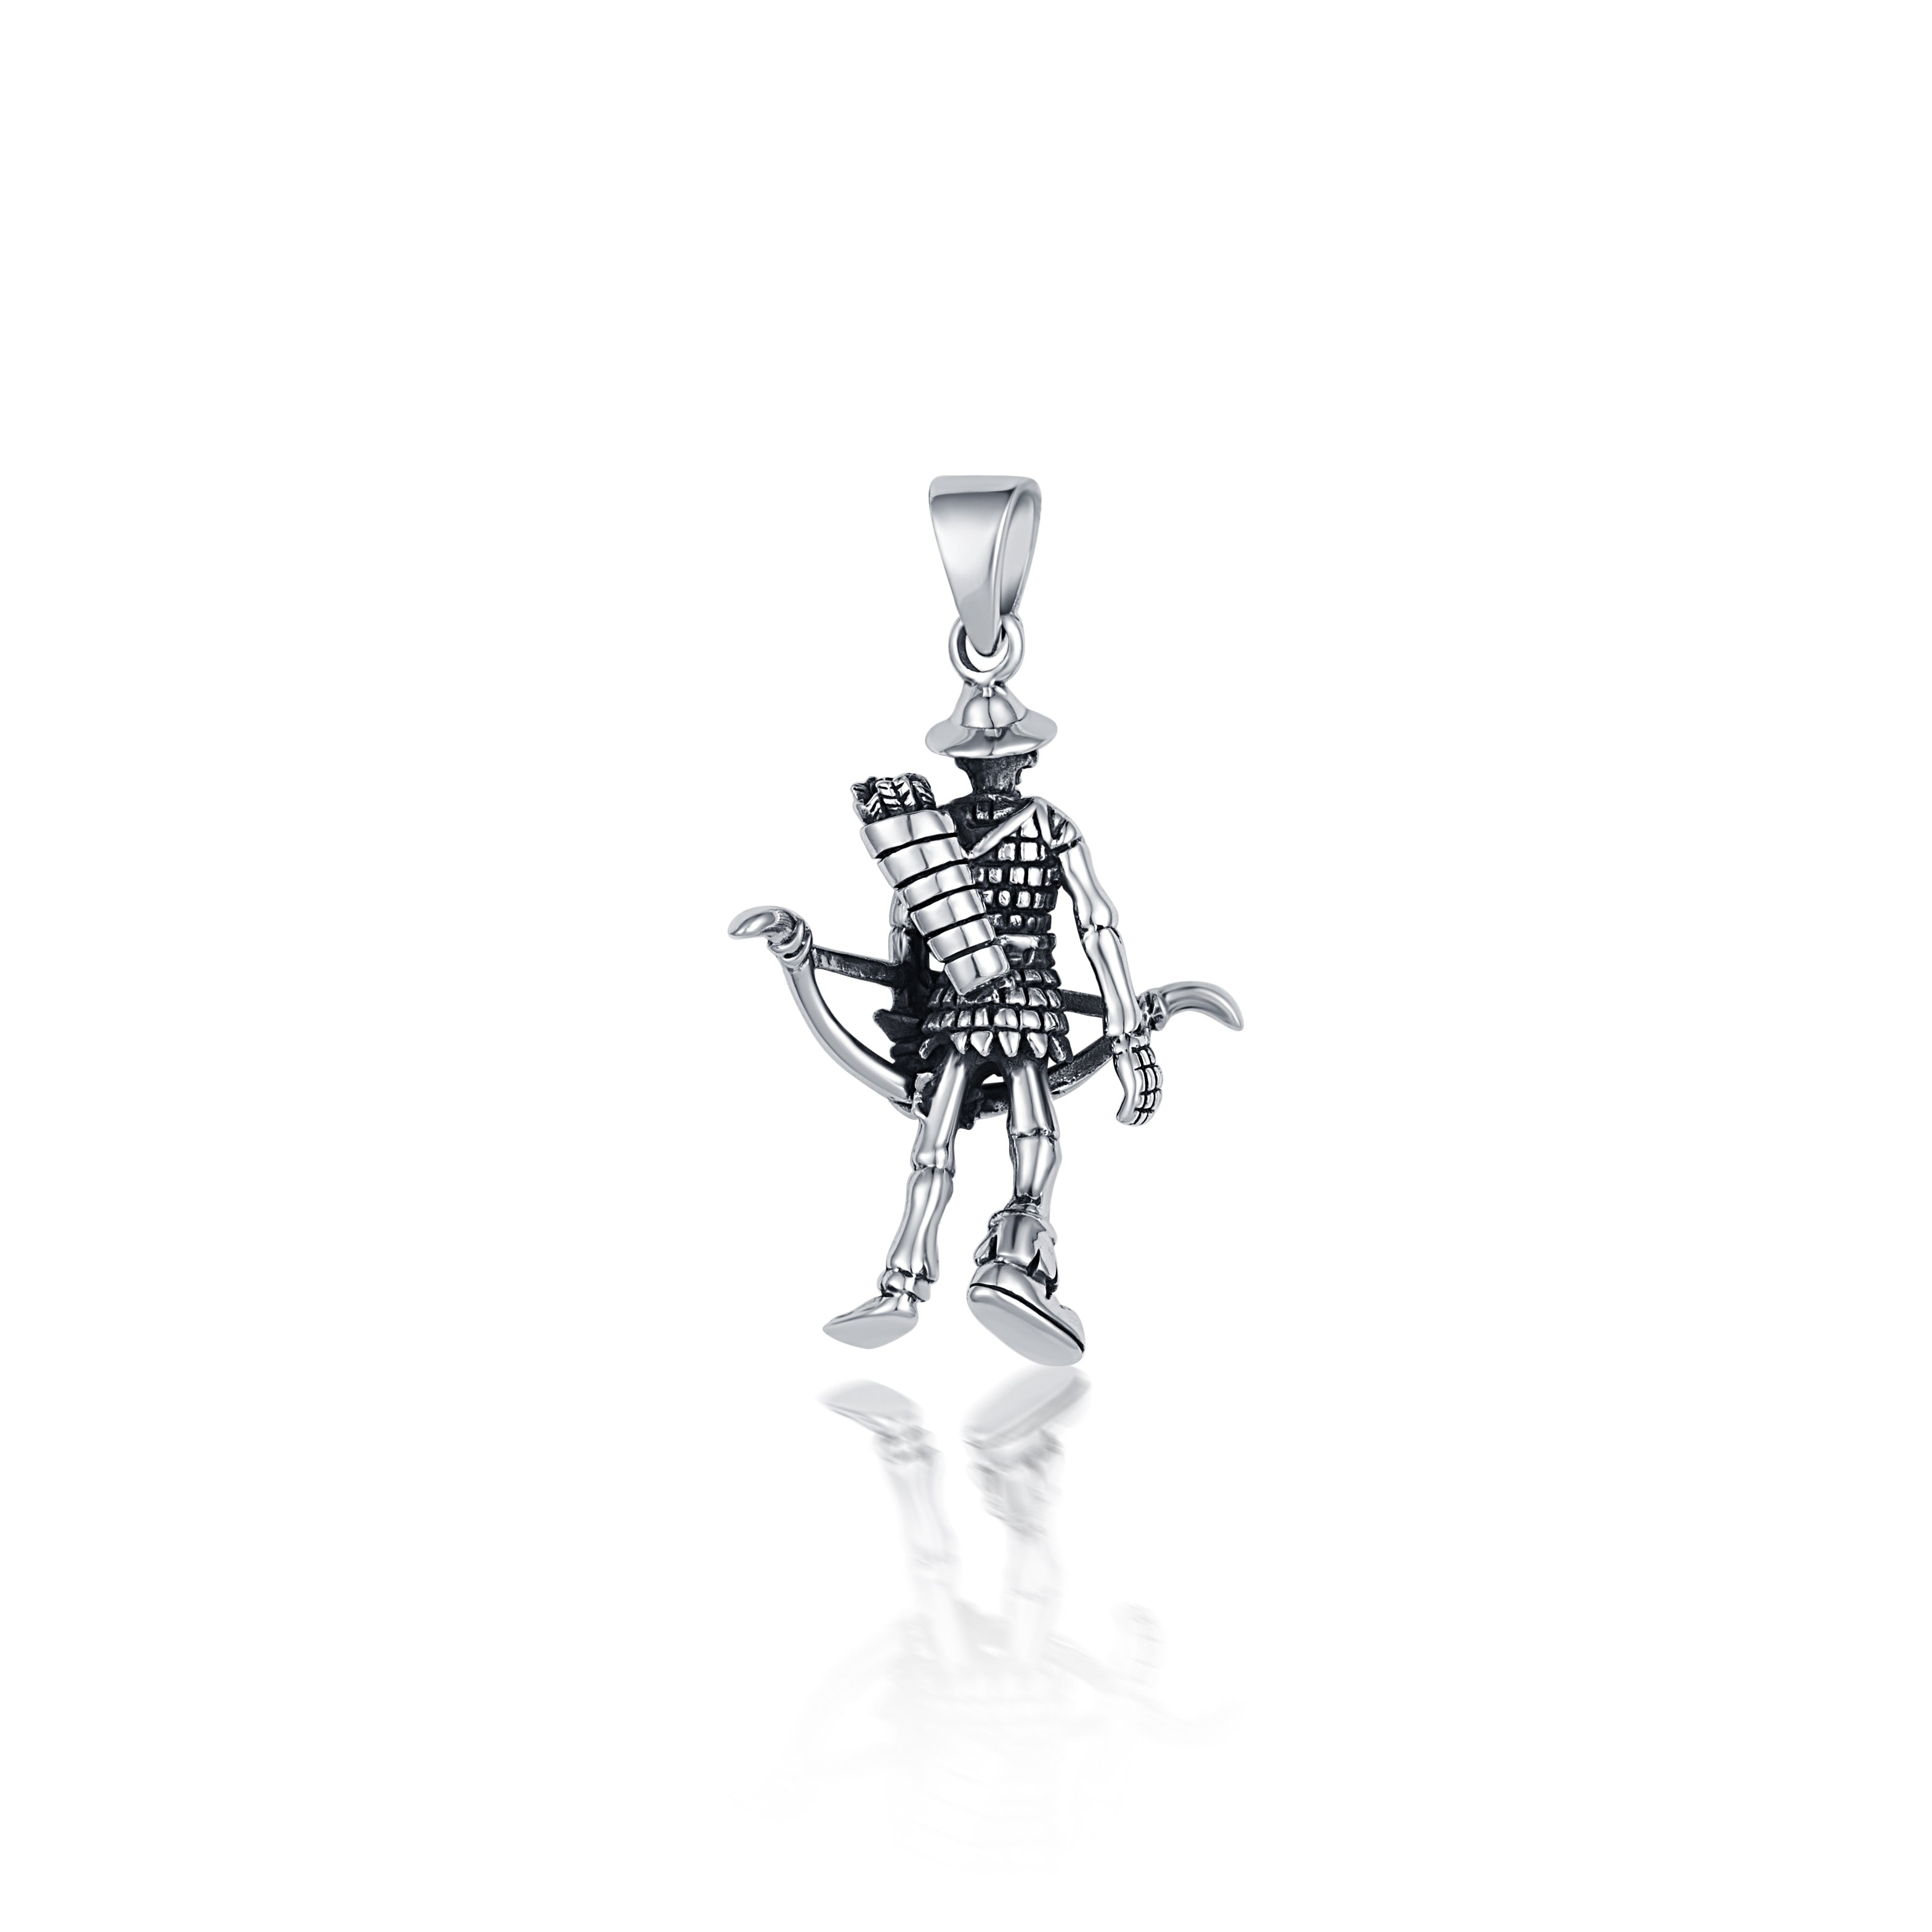 92.5 sterling silver oxidized pendant features a skeleton with bow and arrow